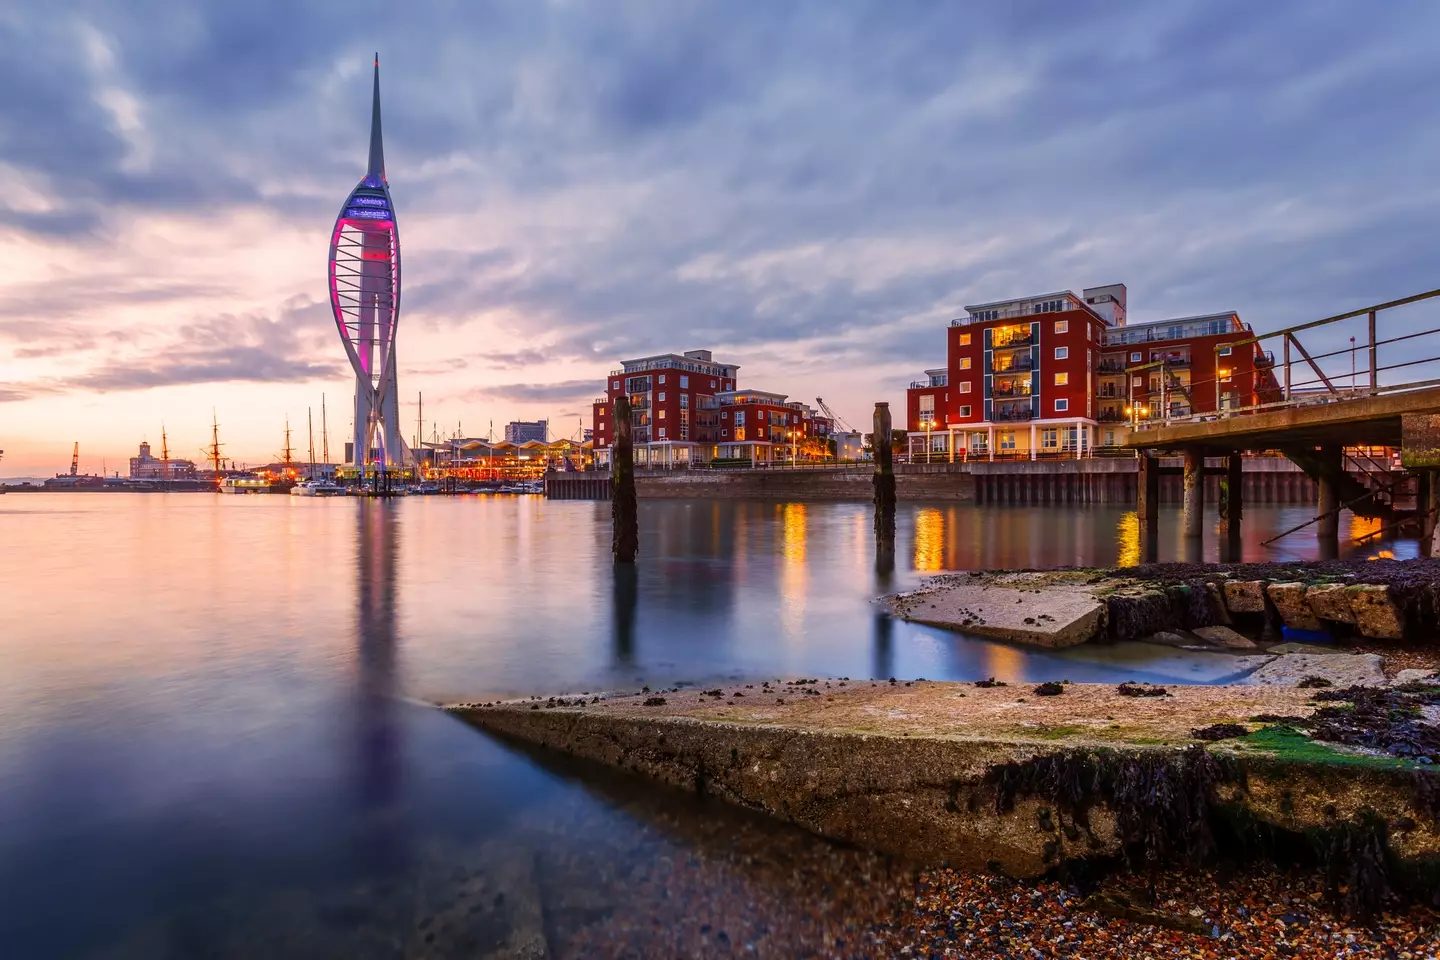 Portsmouth is the largest place on the list.